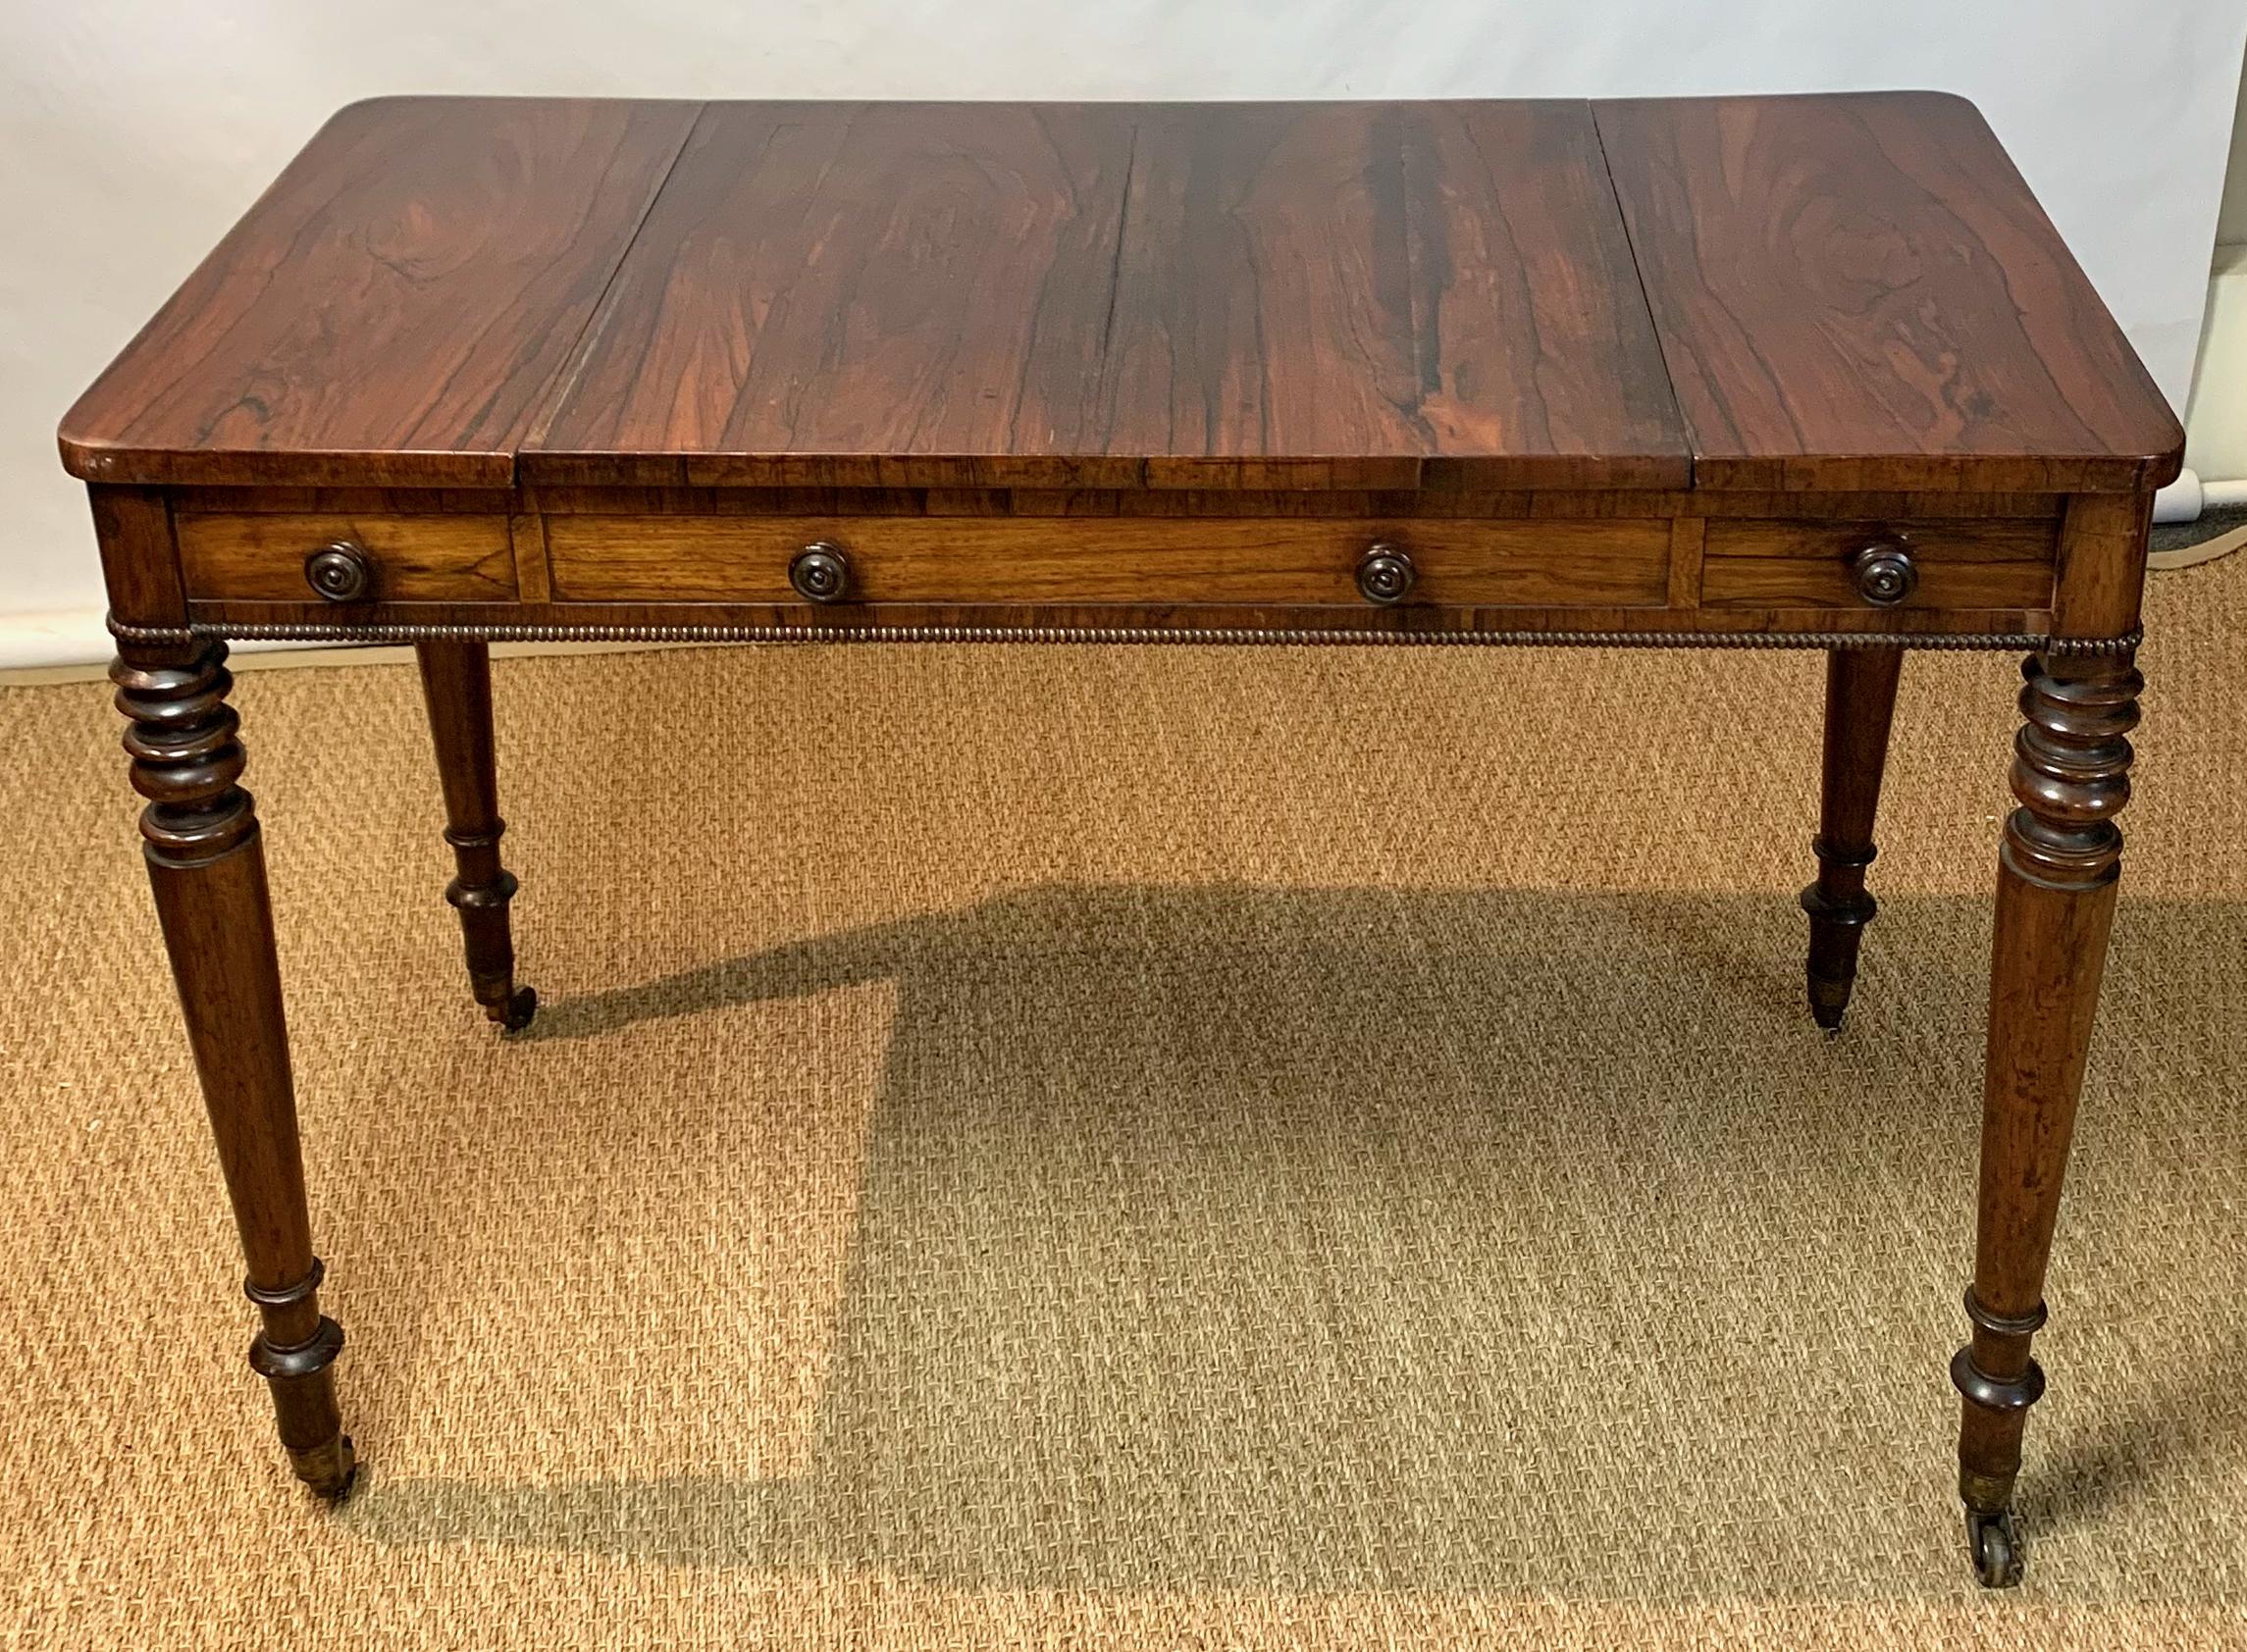 An elegant William IV or late Regency rosewood games or tric-trac table. The fitted rosewood top slides to reveal a chessboard on reverse and an inset backgammon board retaining its original velvet playing surface. Each side offers a small drawer.